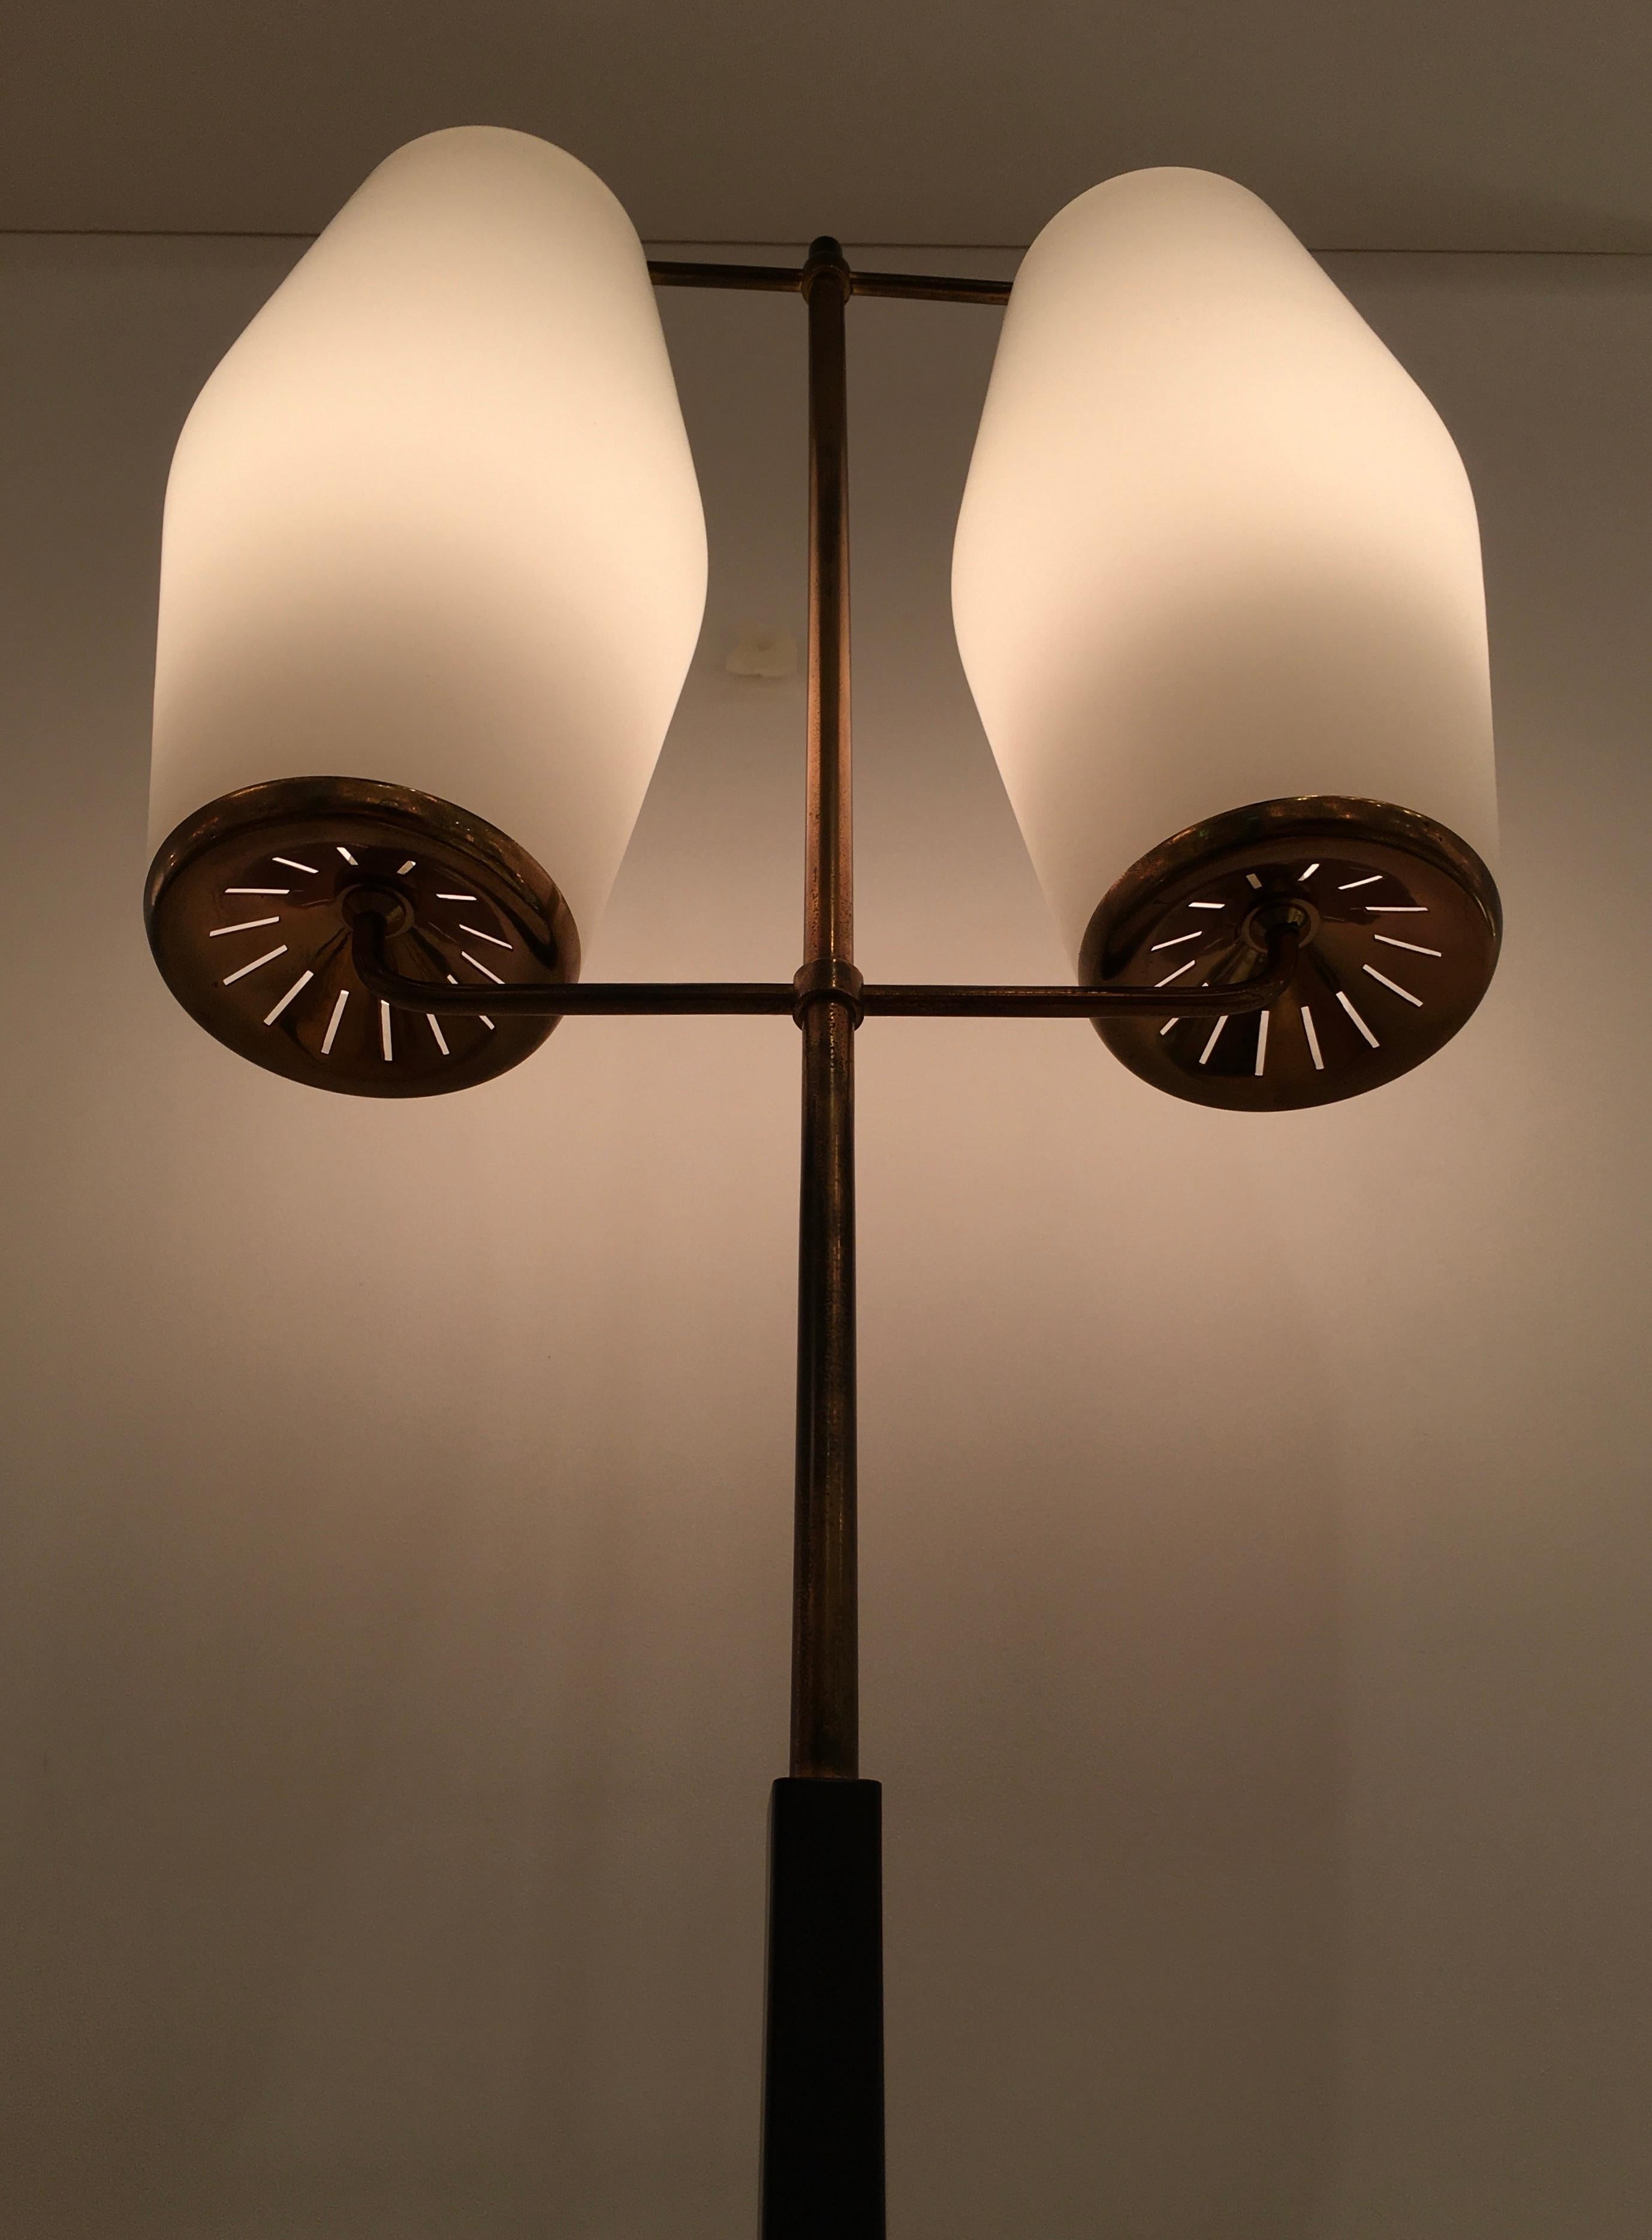 Mid-Century Modern Pair of Brass and Opaline Midcentury Floor Lamps by Stilnovo, Italy, circa 1950